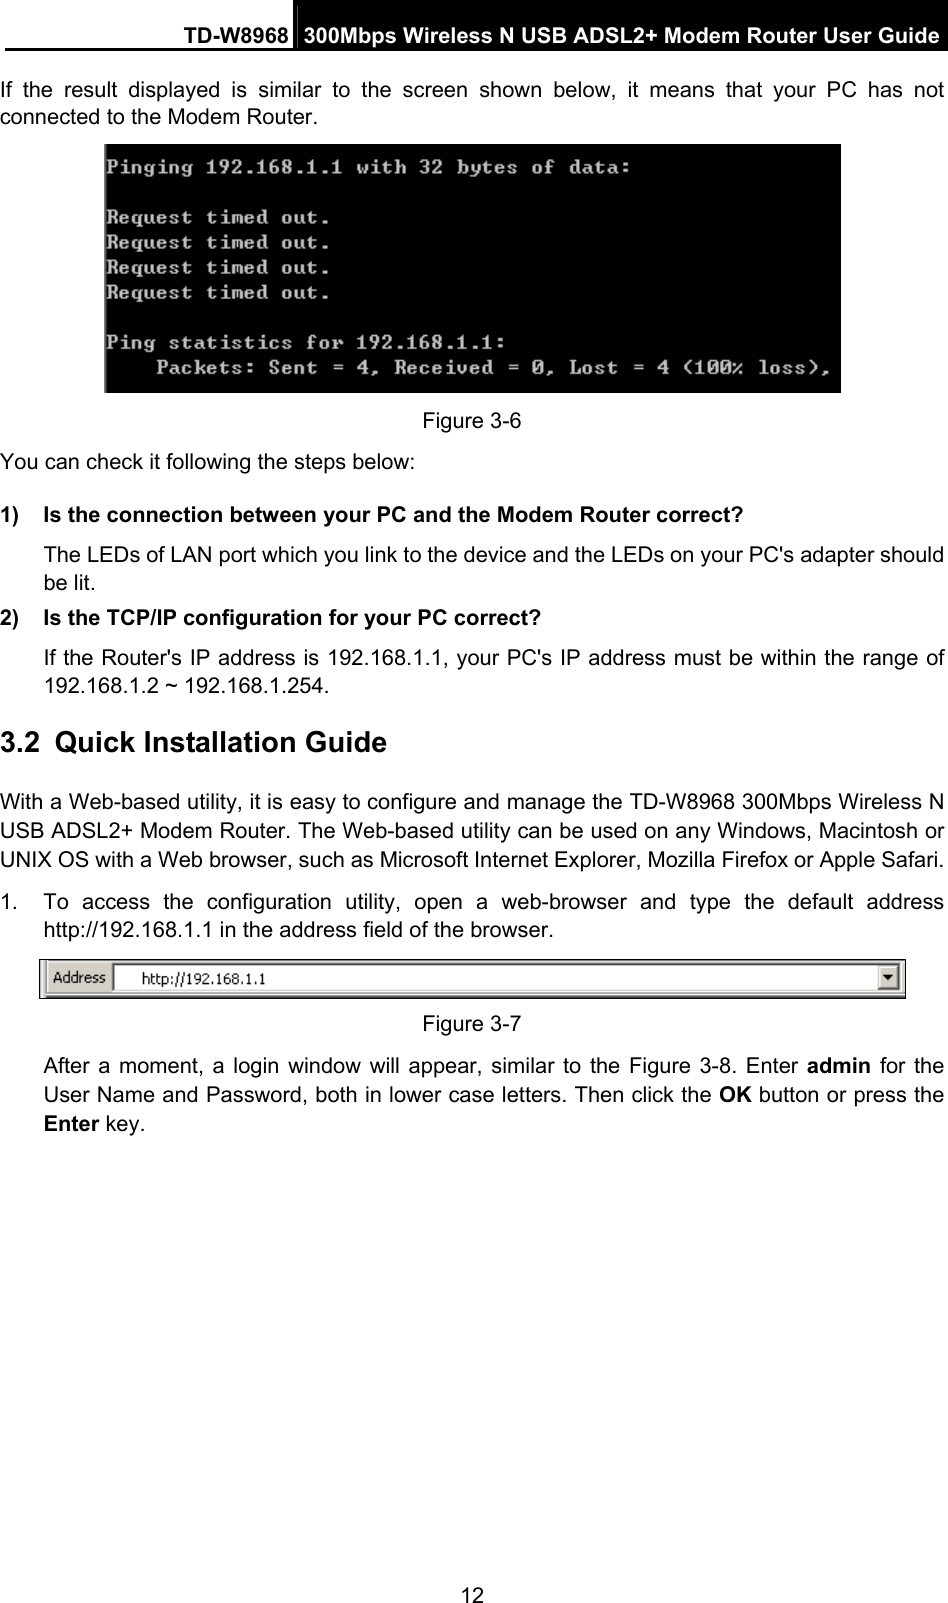 TD-W8968  300Mbps Wireless N USB ADSL2+ Modem Router User Guide 12 If the result displayed is similar to the screen shown below, it means that your PC has not connected to the Modem Router.  Figure 3-6 You can check it following the steps below: 1)  Is the connection between your PC and the Modem Router correct? The LEDs of LAN port which you link to the device and the LEDs on your PC&apos;s adapter should be lit. 2)  Is the TCP/IP configuration for your PC correct? If the Router&apos;s IP address is 192.168.1.1, your PC&apos;s IP address must be within the range of 192.168.1.2 ~ 192.168.1.254. 3.2  Quick Installation Guide With a Web-based utility, it is easy to configure and manage the TD-W8968 300Mbps Wireless N USB ADSL2+ Modem Router. The Web-based utility can be used on any Windows, Macintosh or UNIX OS with a Web browser, such as Microsoft Internet Explorer, Mozilla Firefox or Apple Safari. 1.  To access the configuration utility, open a web-browser and type the default address http://192.168.1.1 in the address field of the browser.  Figure 3-7 After a moment, a login window will appear, similar to the Figure 3-8. Enter admin  for the User Name and Password, both in lower case letters. Then click the OK button or press the Enter key. 